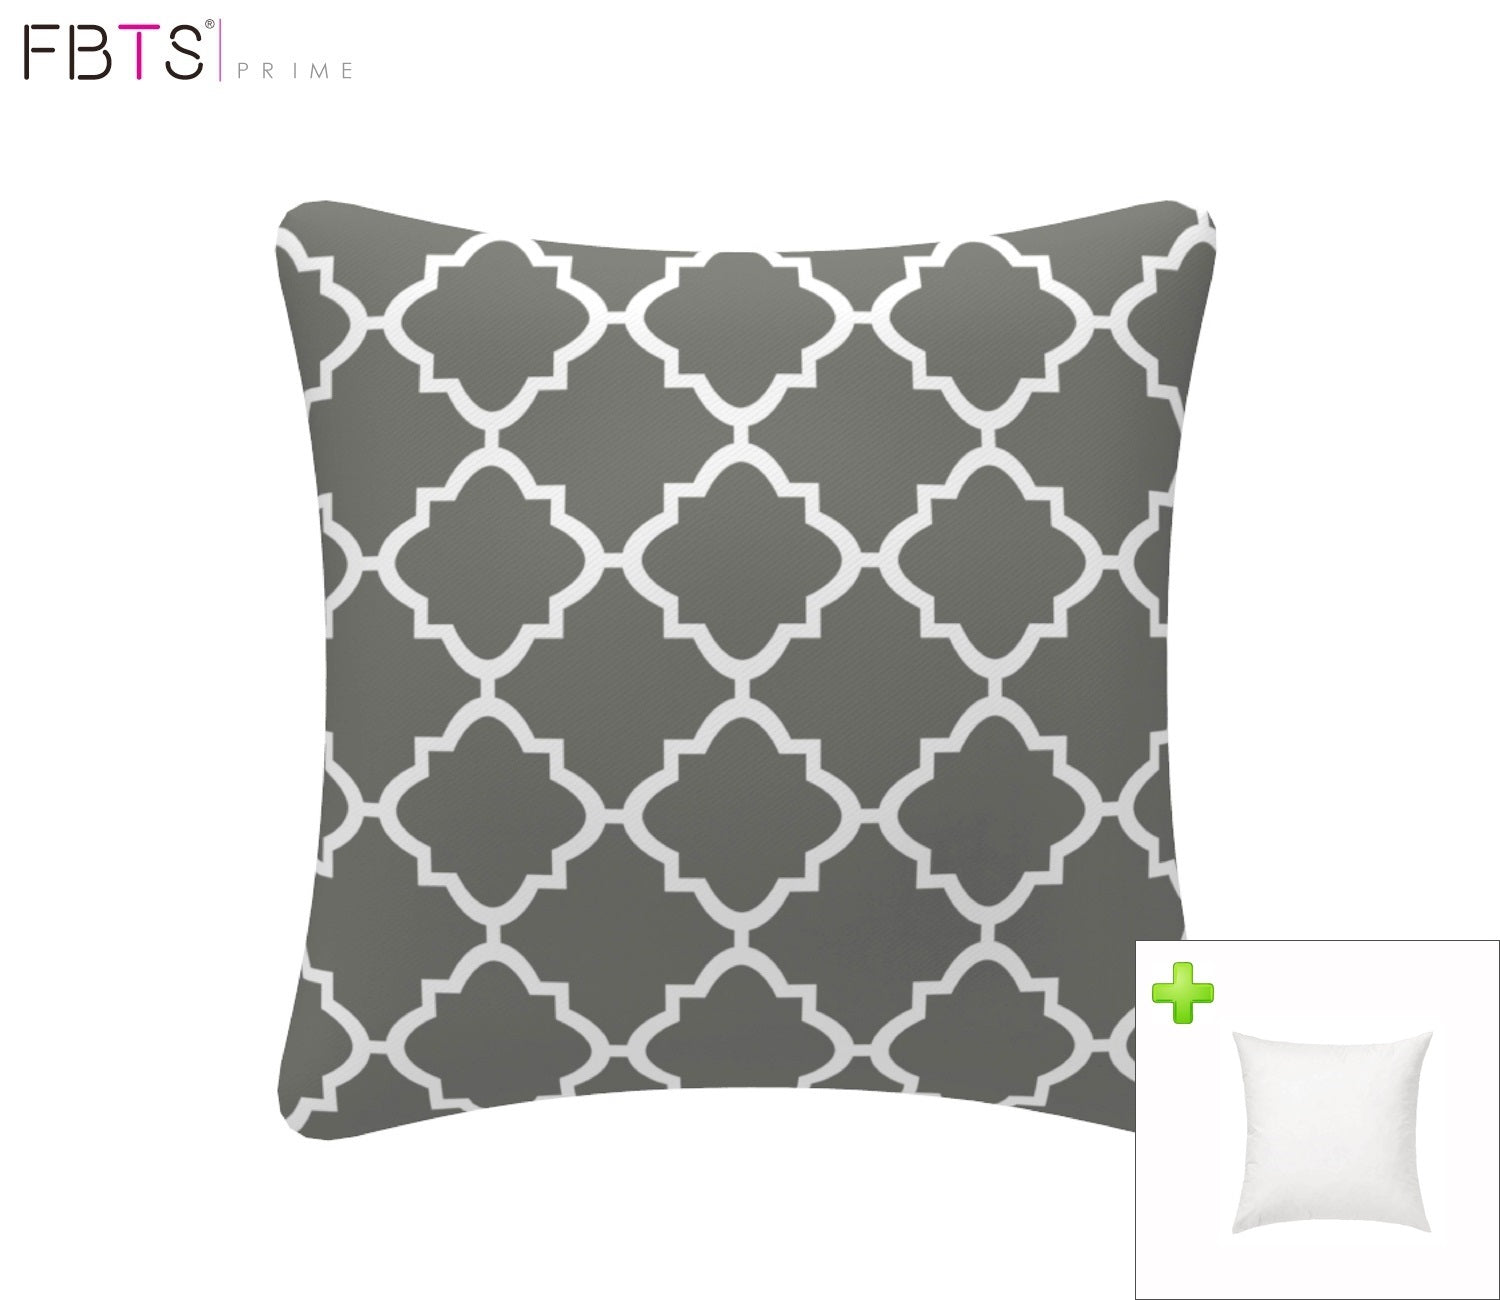 Outdoor Pillows with Insert Gray Quatrefoil Lattice Patio Accent Throw Pillows 18x18 inch Square Decorative Pillows